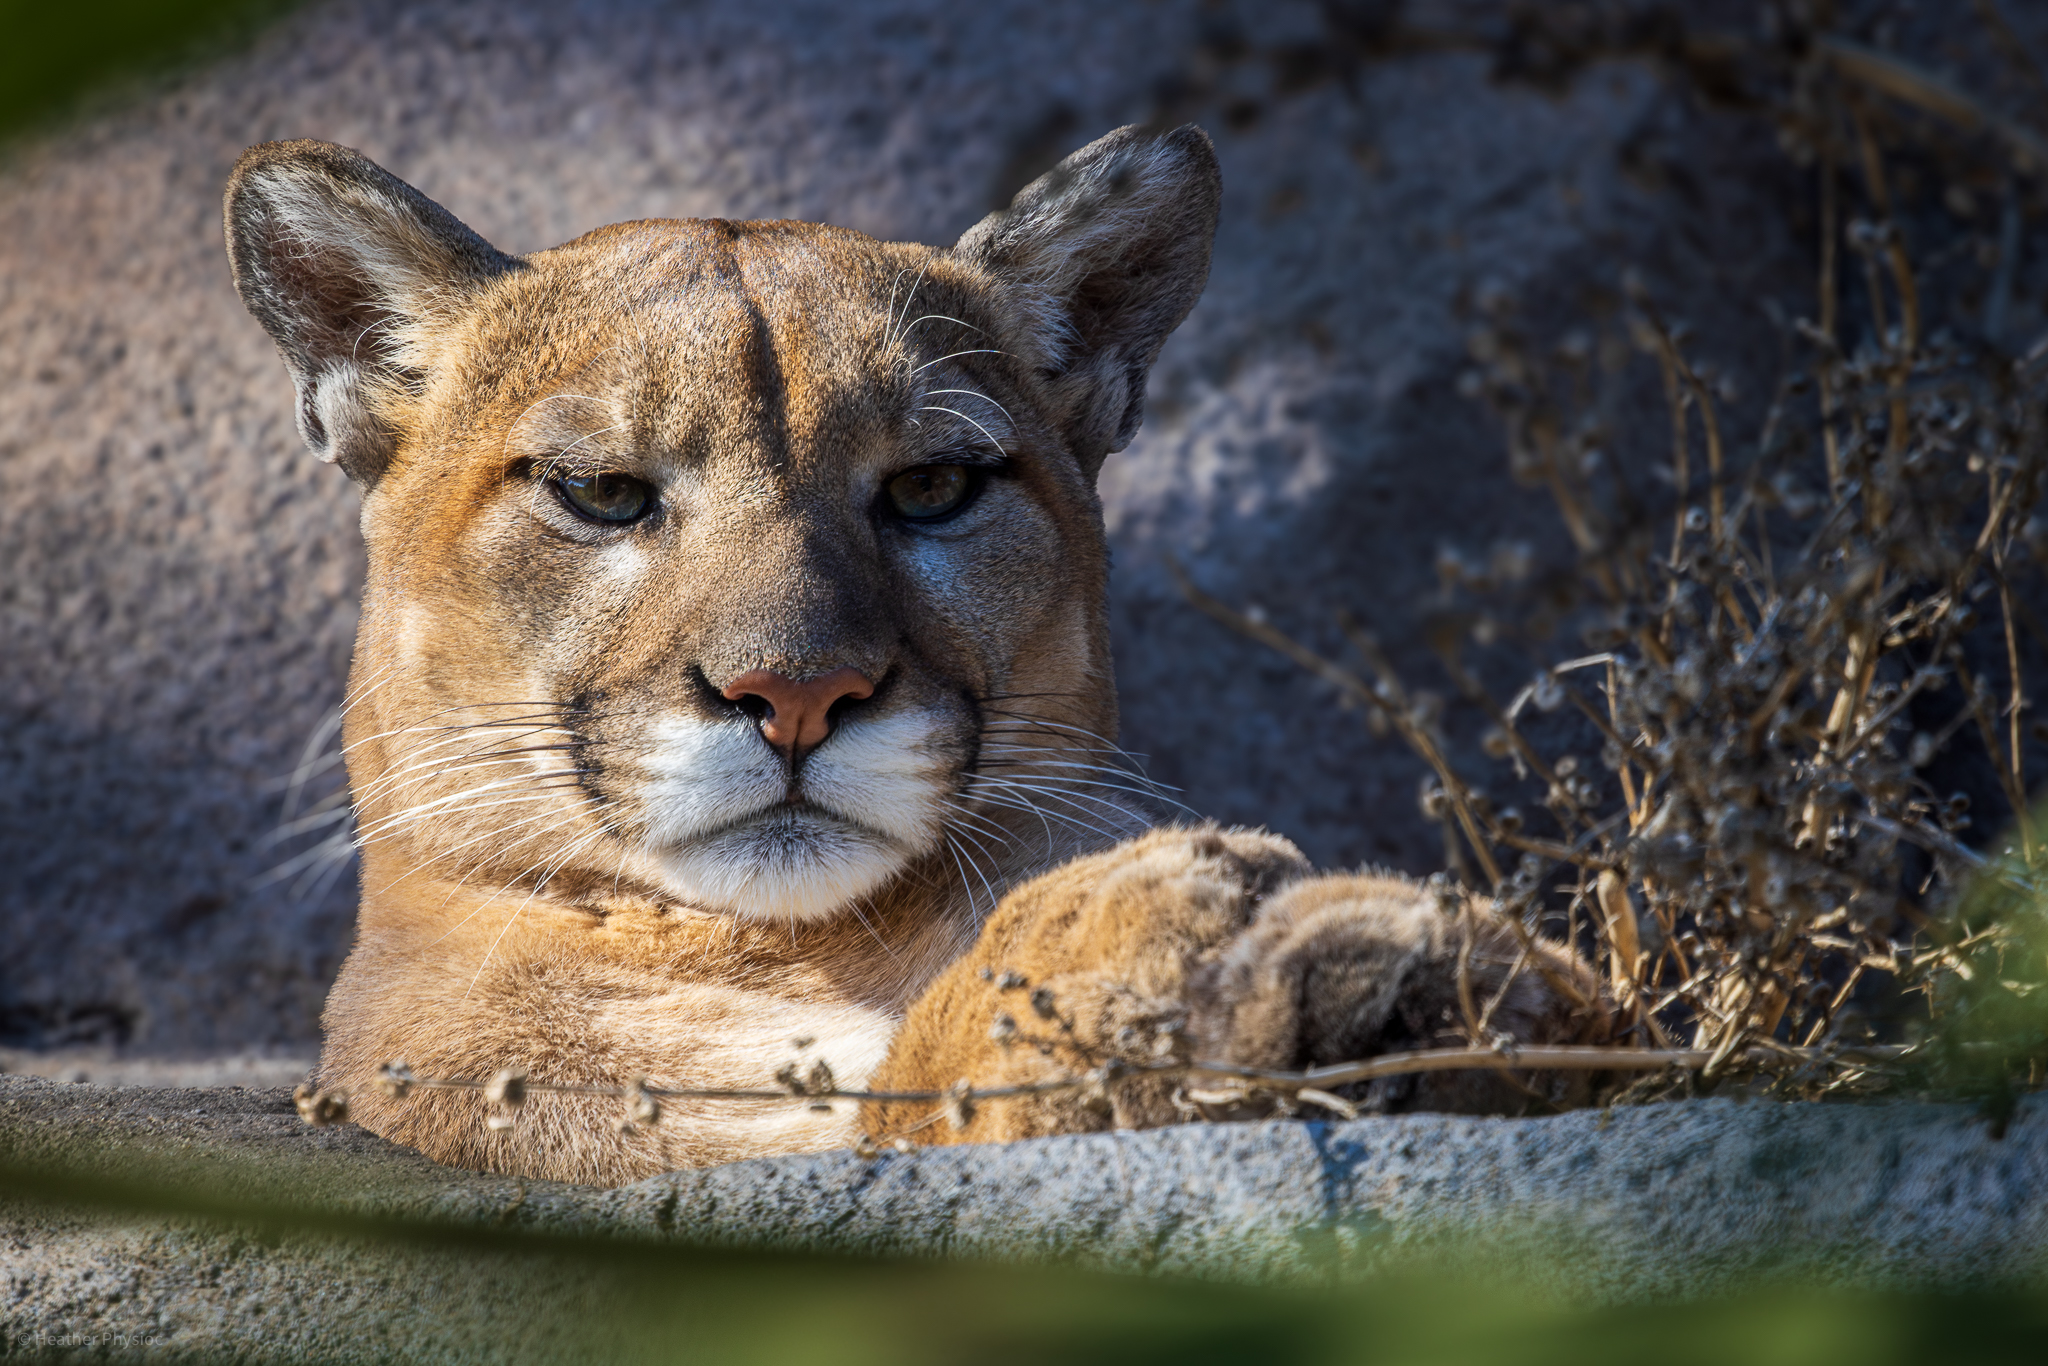 Cougar portrait at the San Diego Zoo